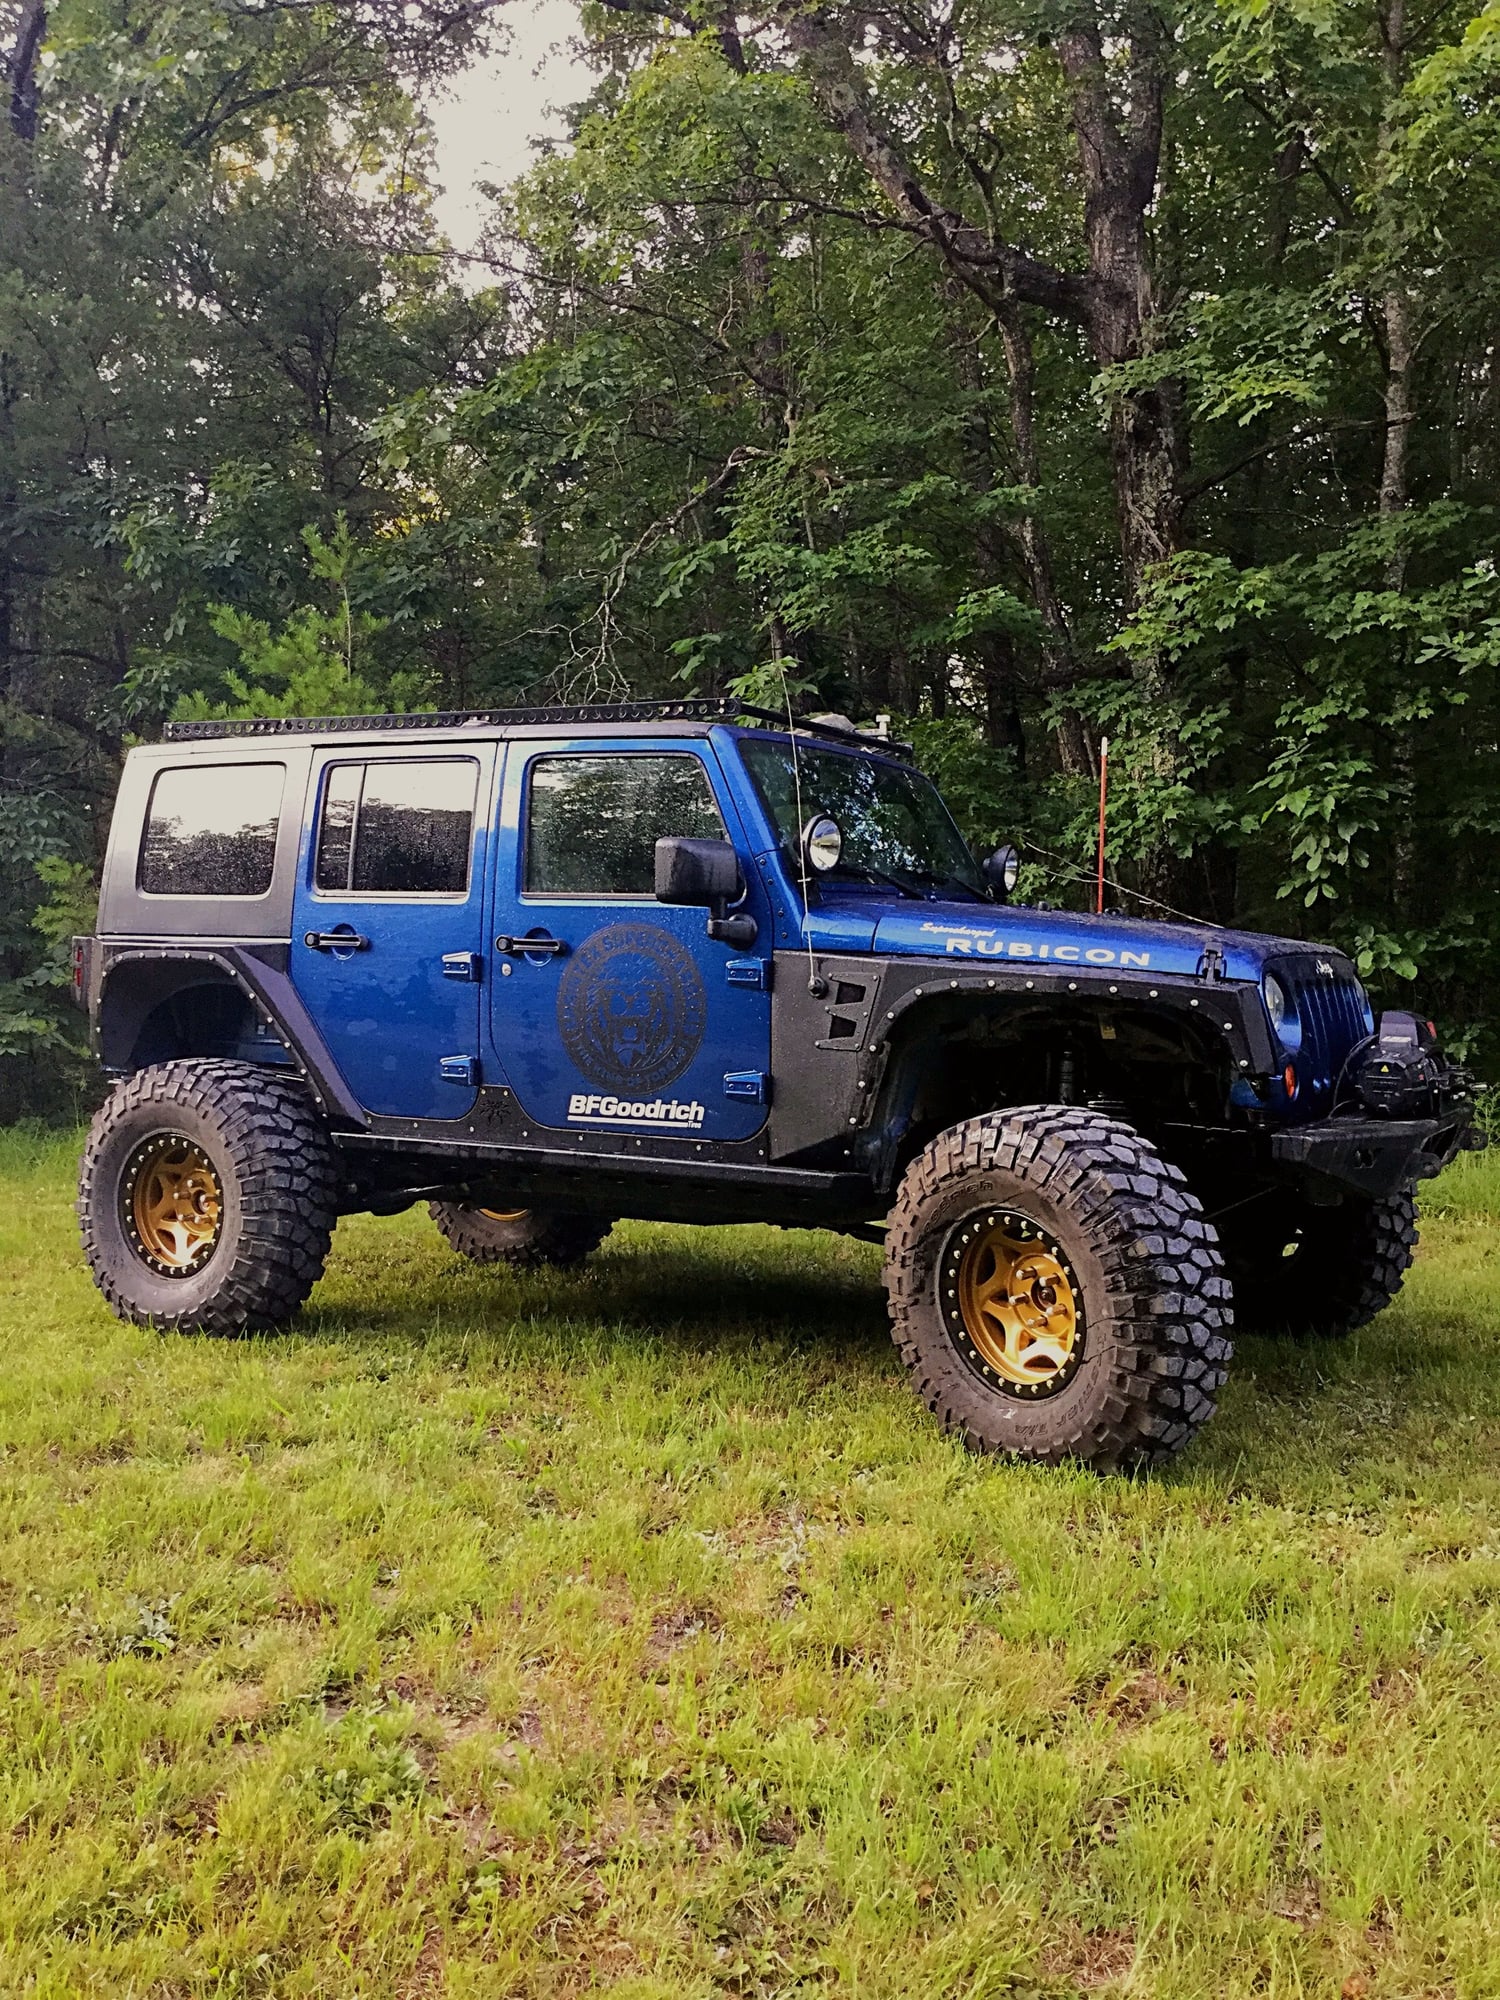 2010 Jeep Wrangler - 2010 Wrangler JKU Rubicon Loaded - Used - VIN 12345678910 - 126,000 Miles - 6 cyl - 4WD - Automatic - SUV - Blue - Crab Orchard, TN 37723, United States